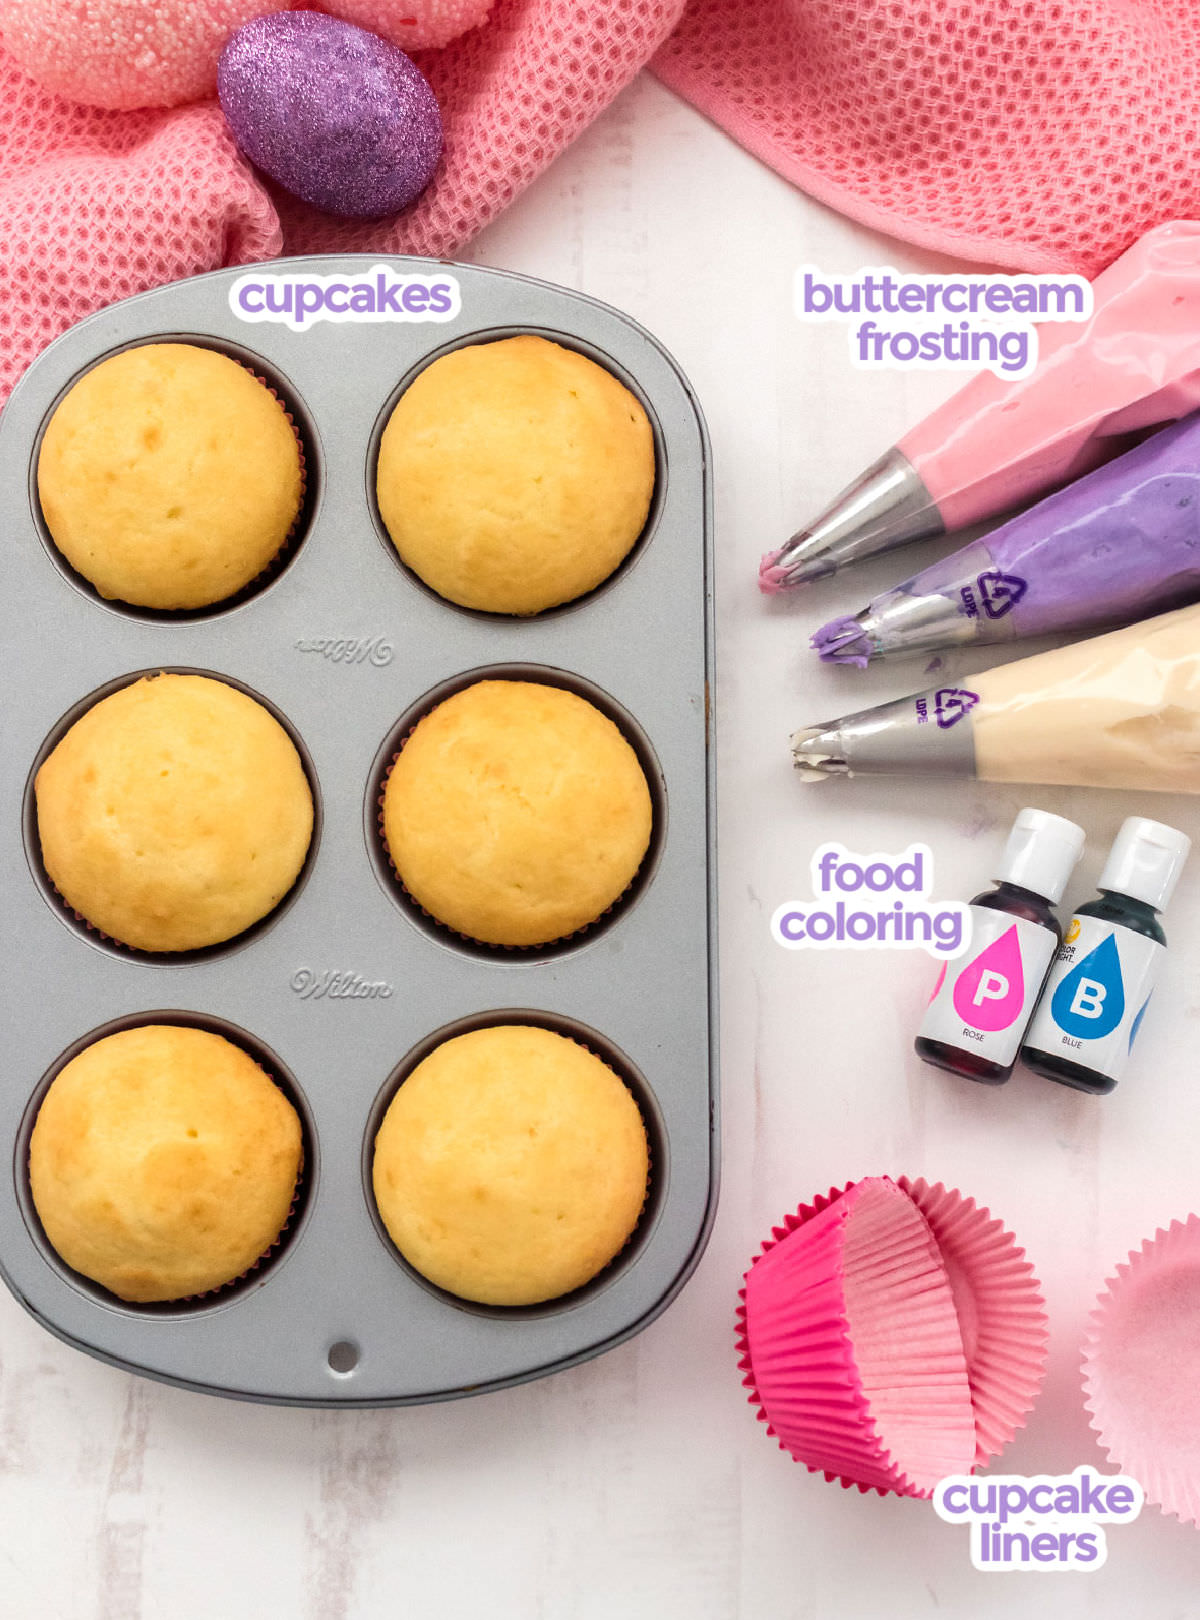 All the ingredients you will need to make Easter Cupcakes including cupcakes, purple, pink and white frosting, food coloring and cupcake liners.